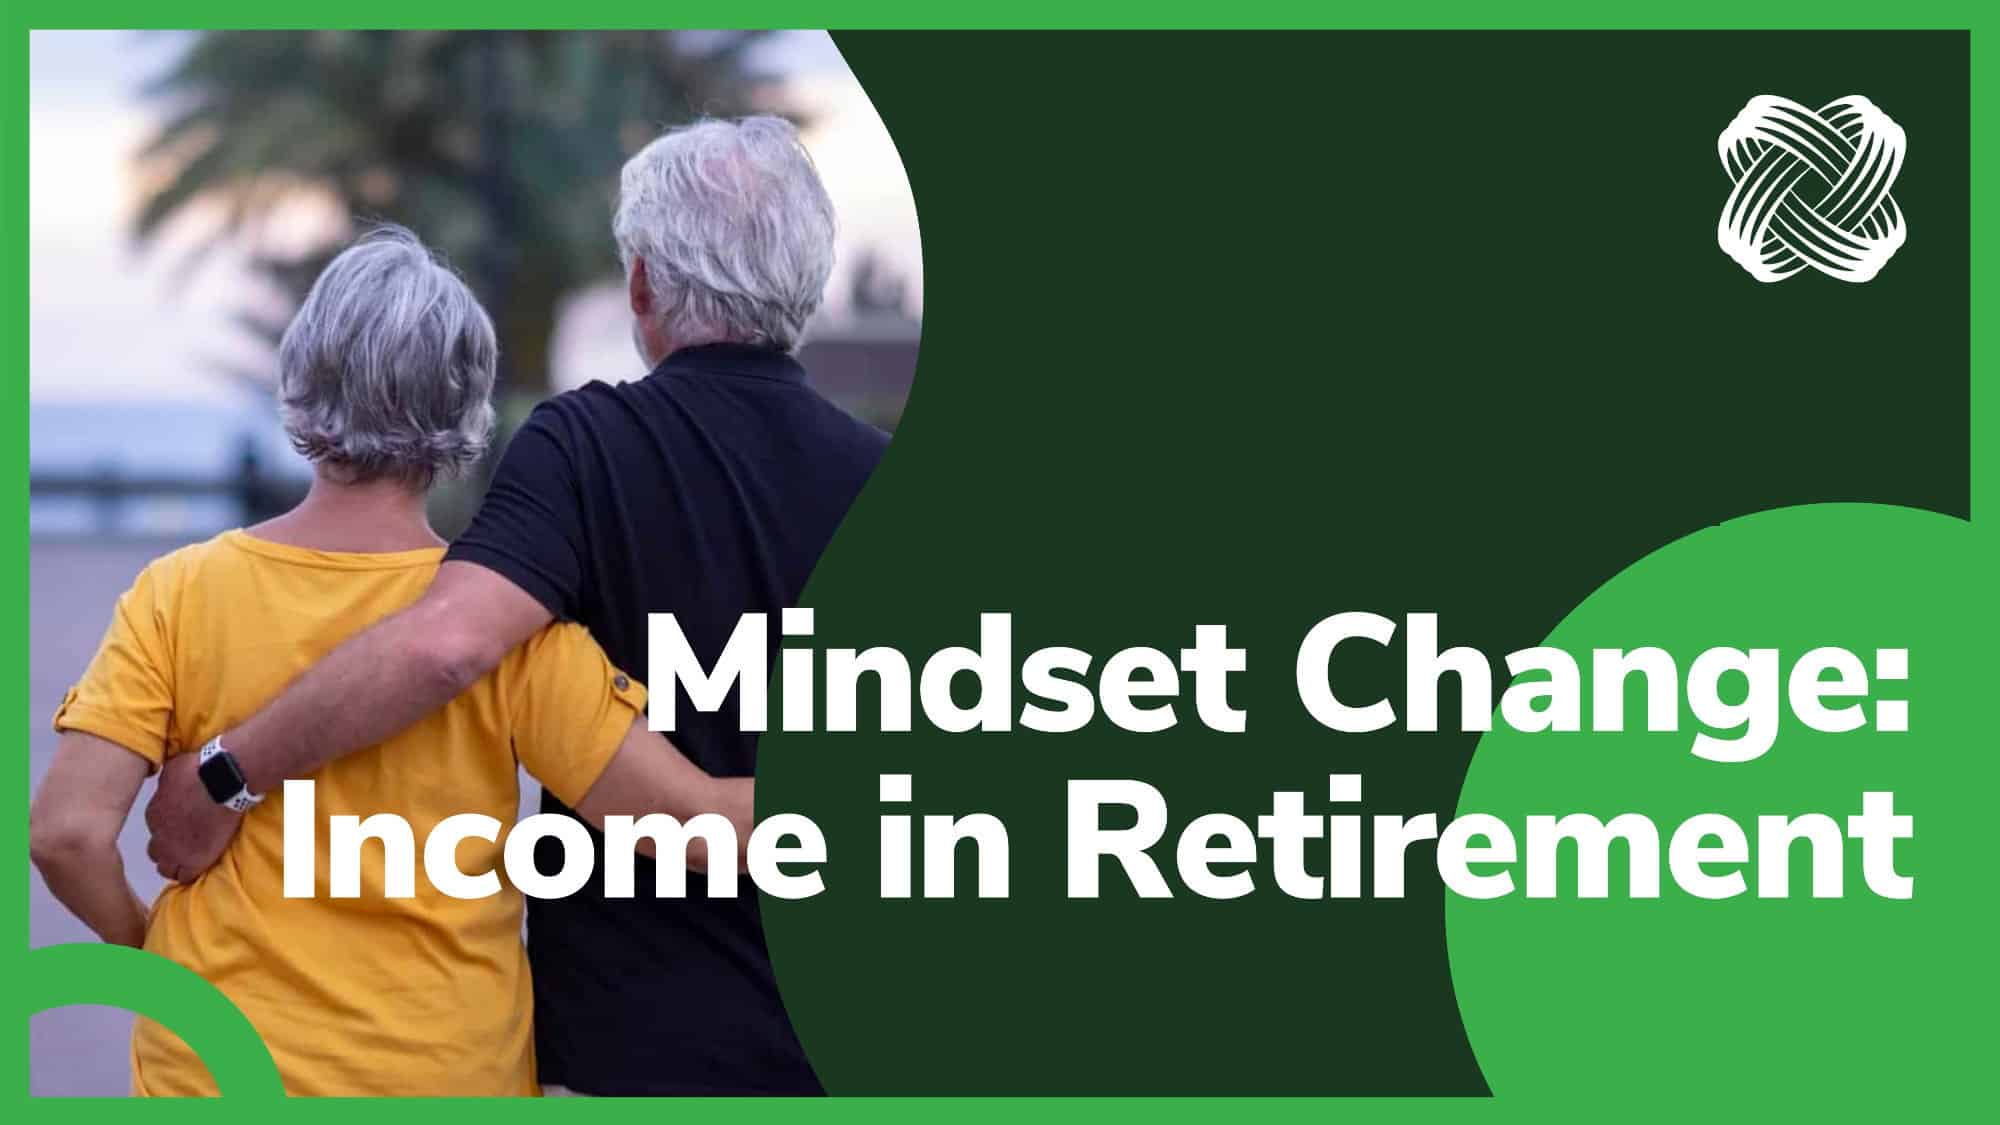 Mindset change - Income in retirement poster